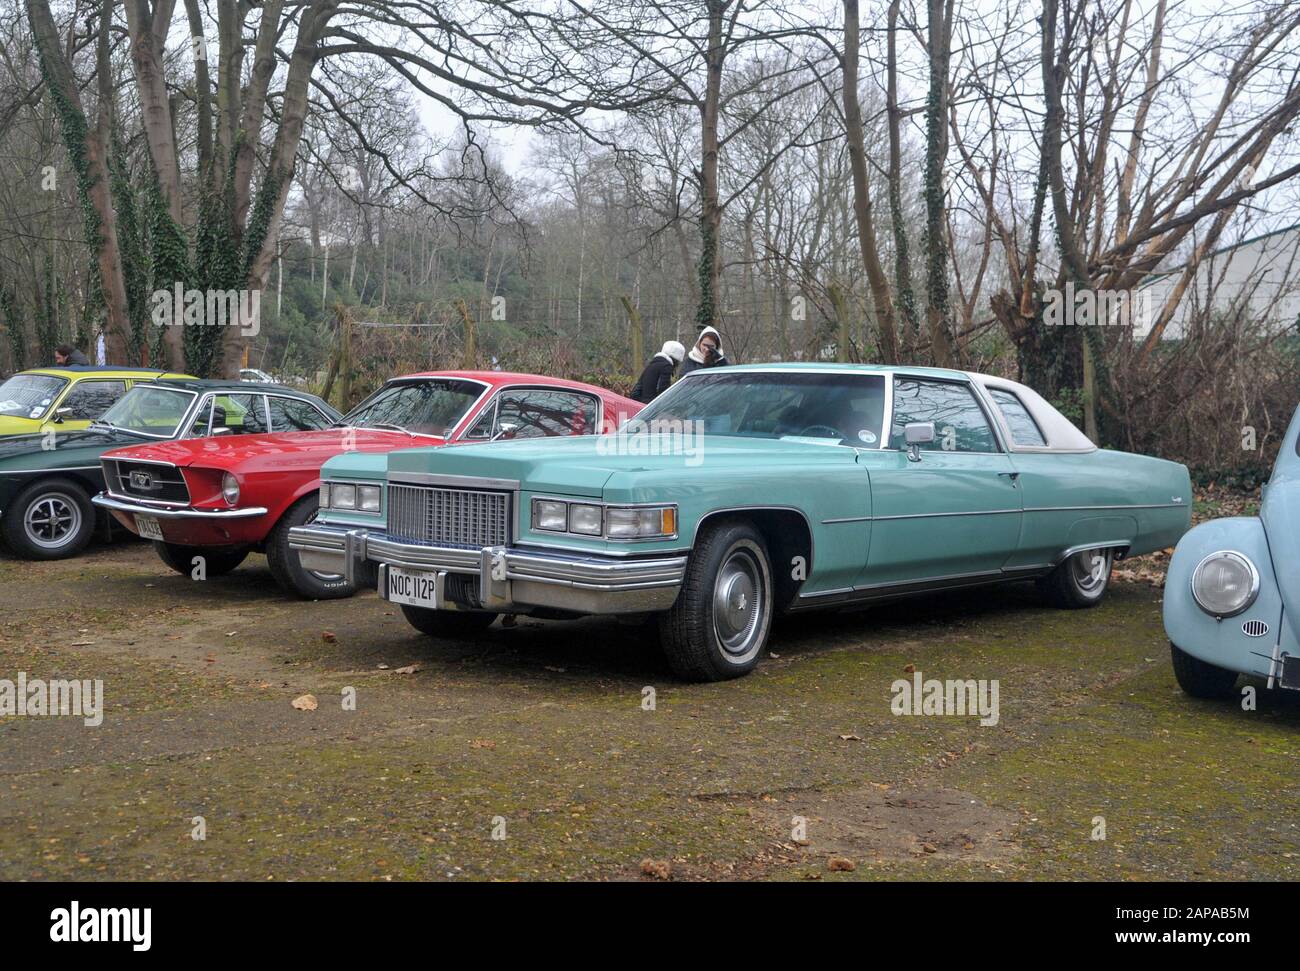 Brooklands New Years Day classic car meeting,  2015. 1975 Cadillac Stock Photo